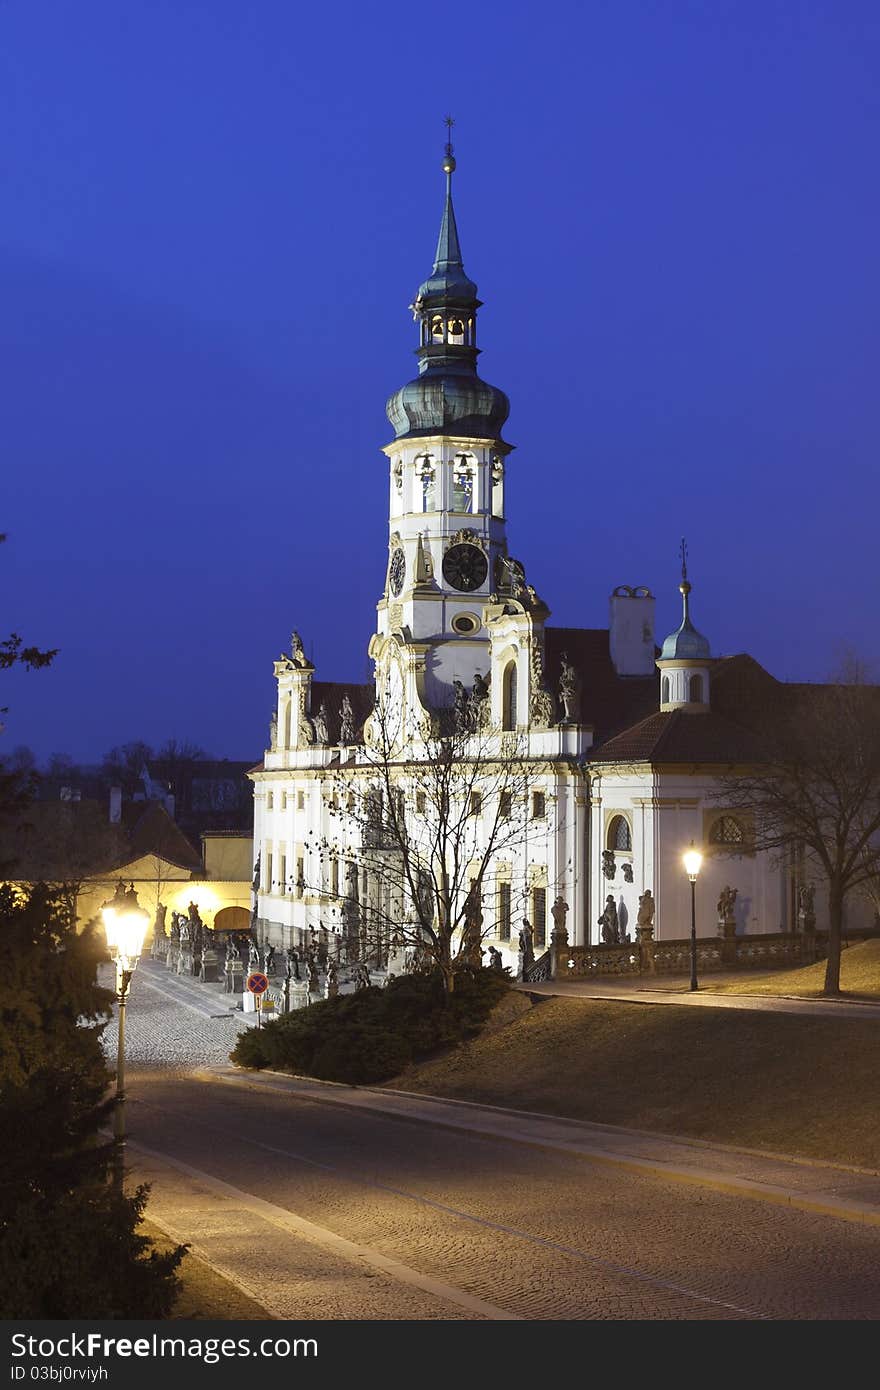 The Loreta at night. It is the pilgrimage destination in Hradcany, a district of Prague, Czech Republic. The Loreta at night. It is the pilgrimage destination in Hradcany, a district of Prague, Czech Republic.